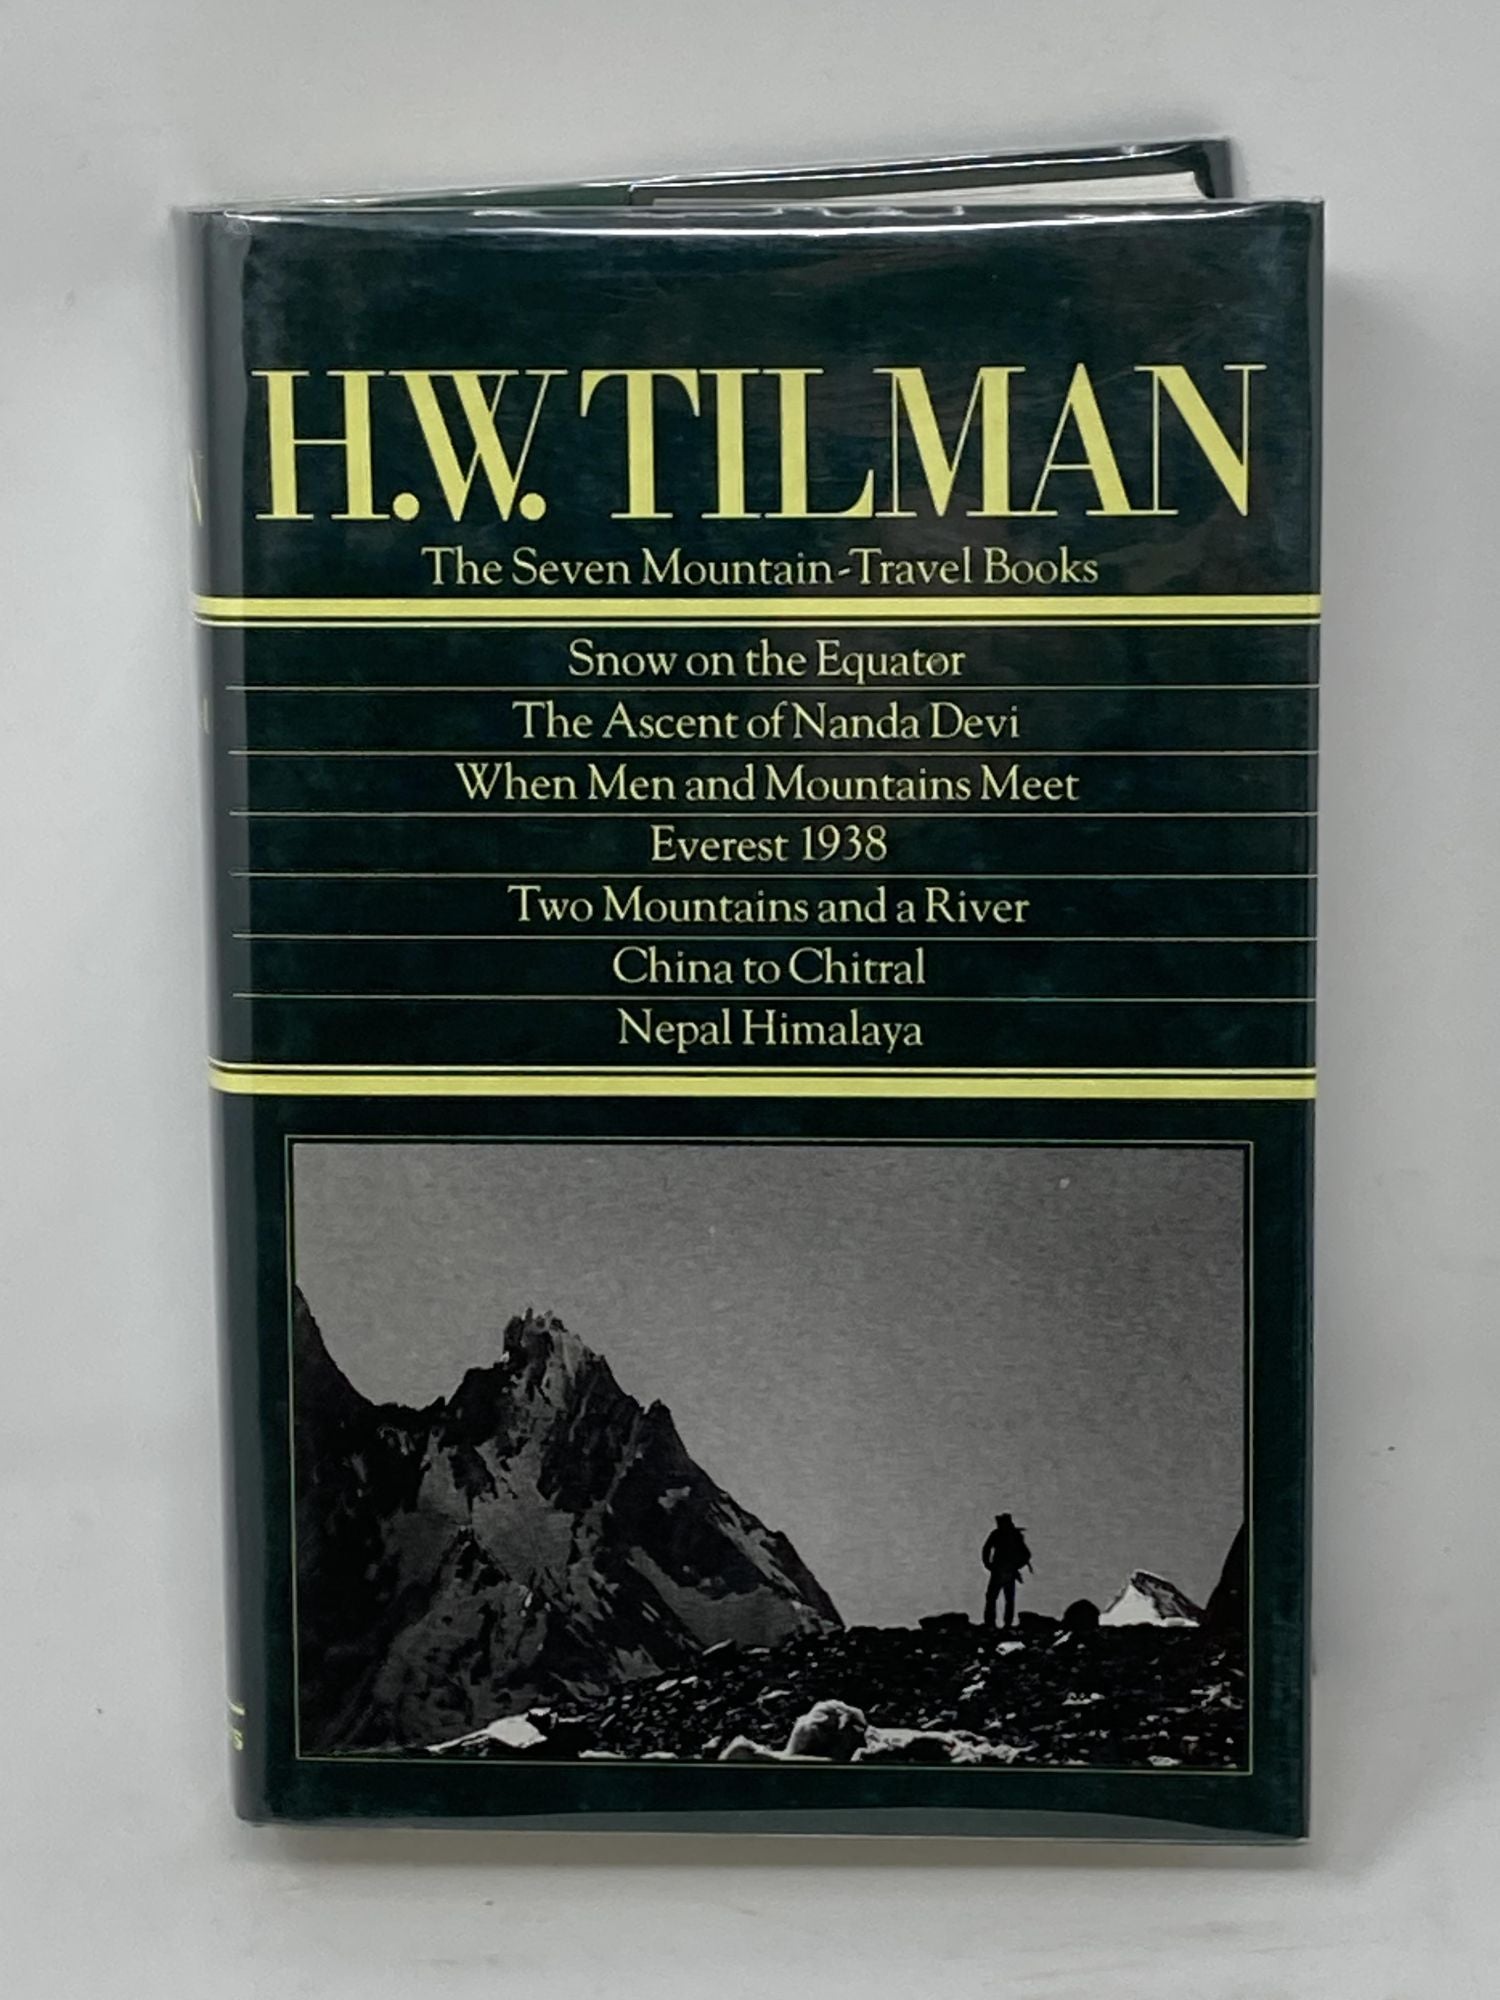 Tilman, H.W. - The Seven Mountain Travel Books; Introduction by Jim Perrin